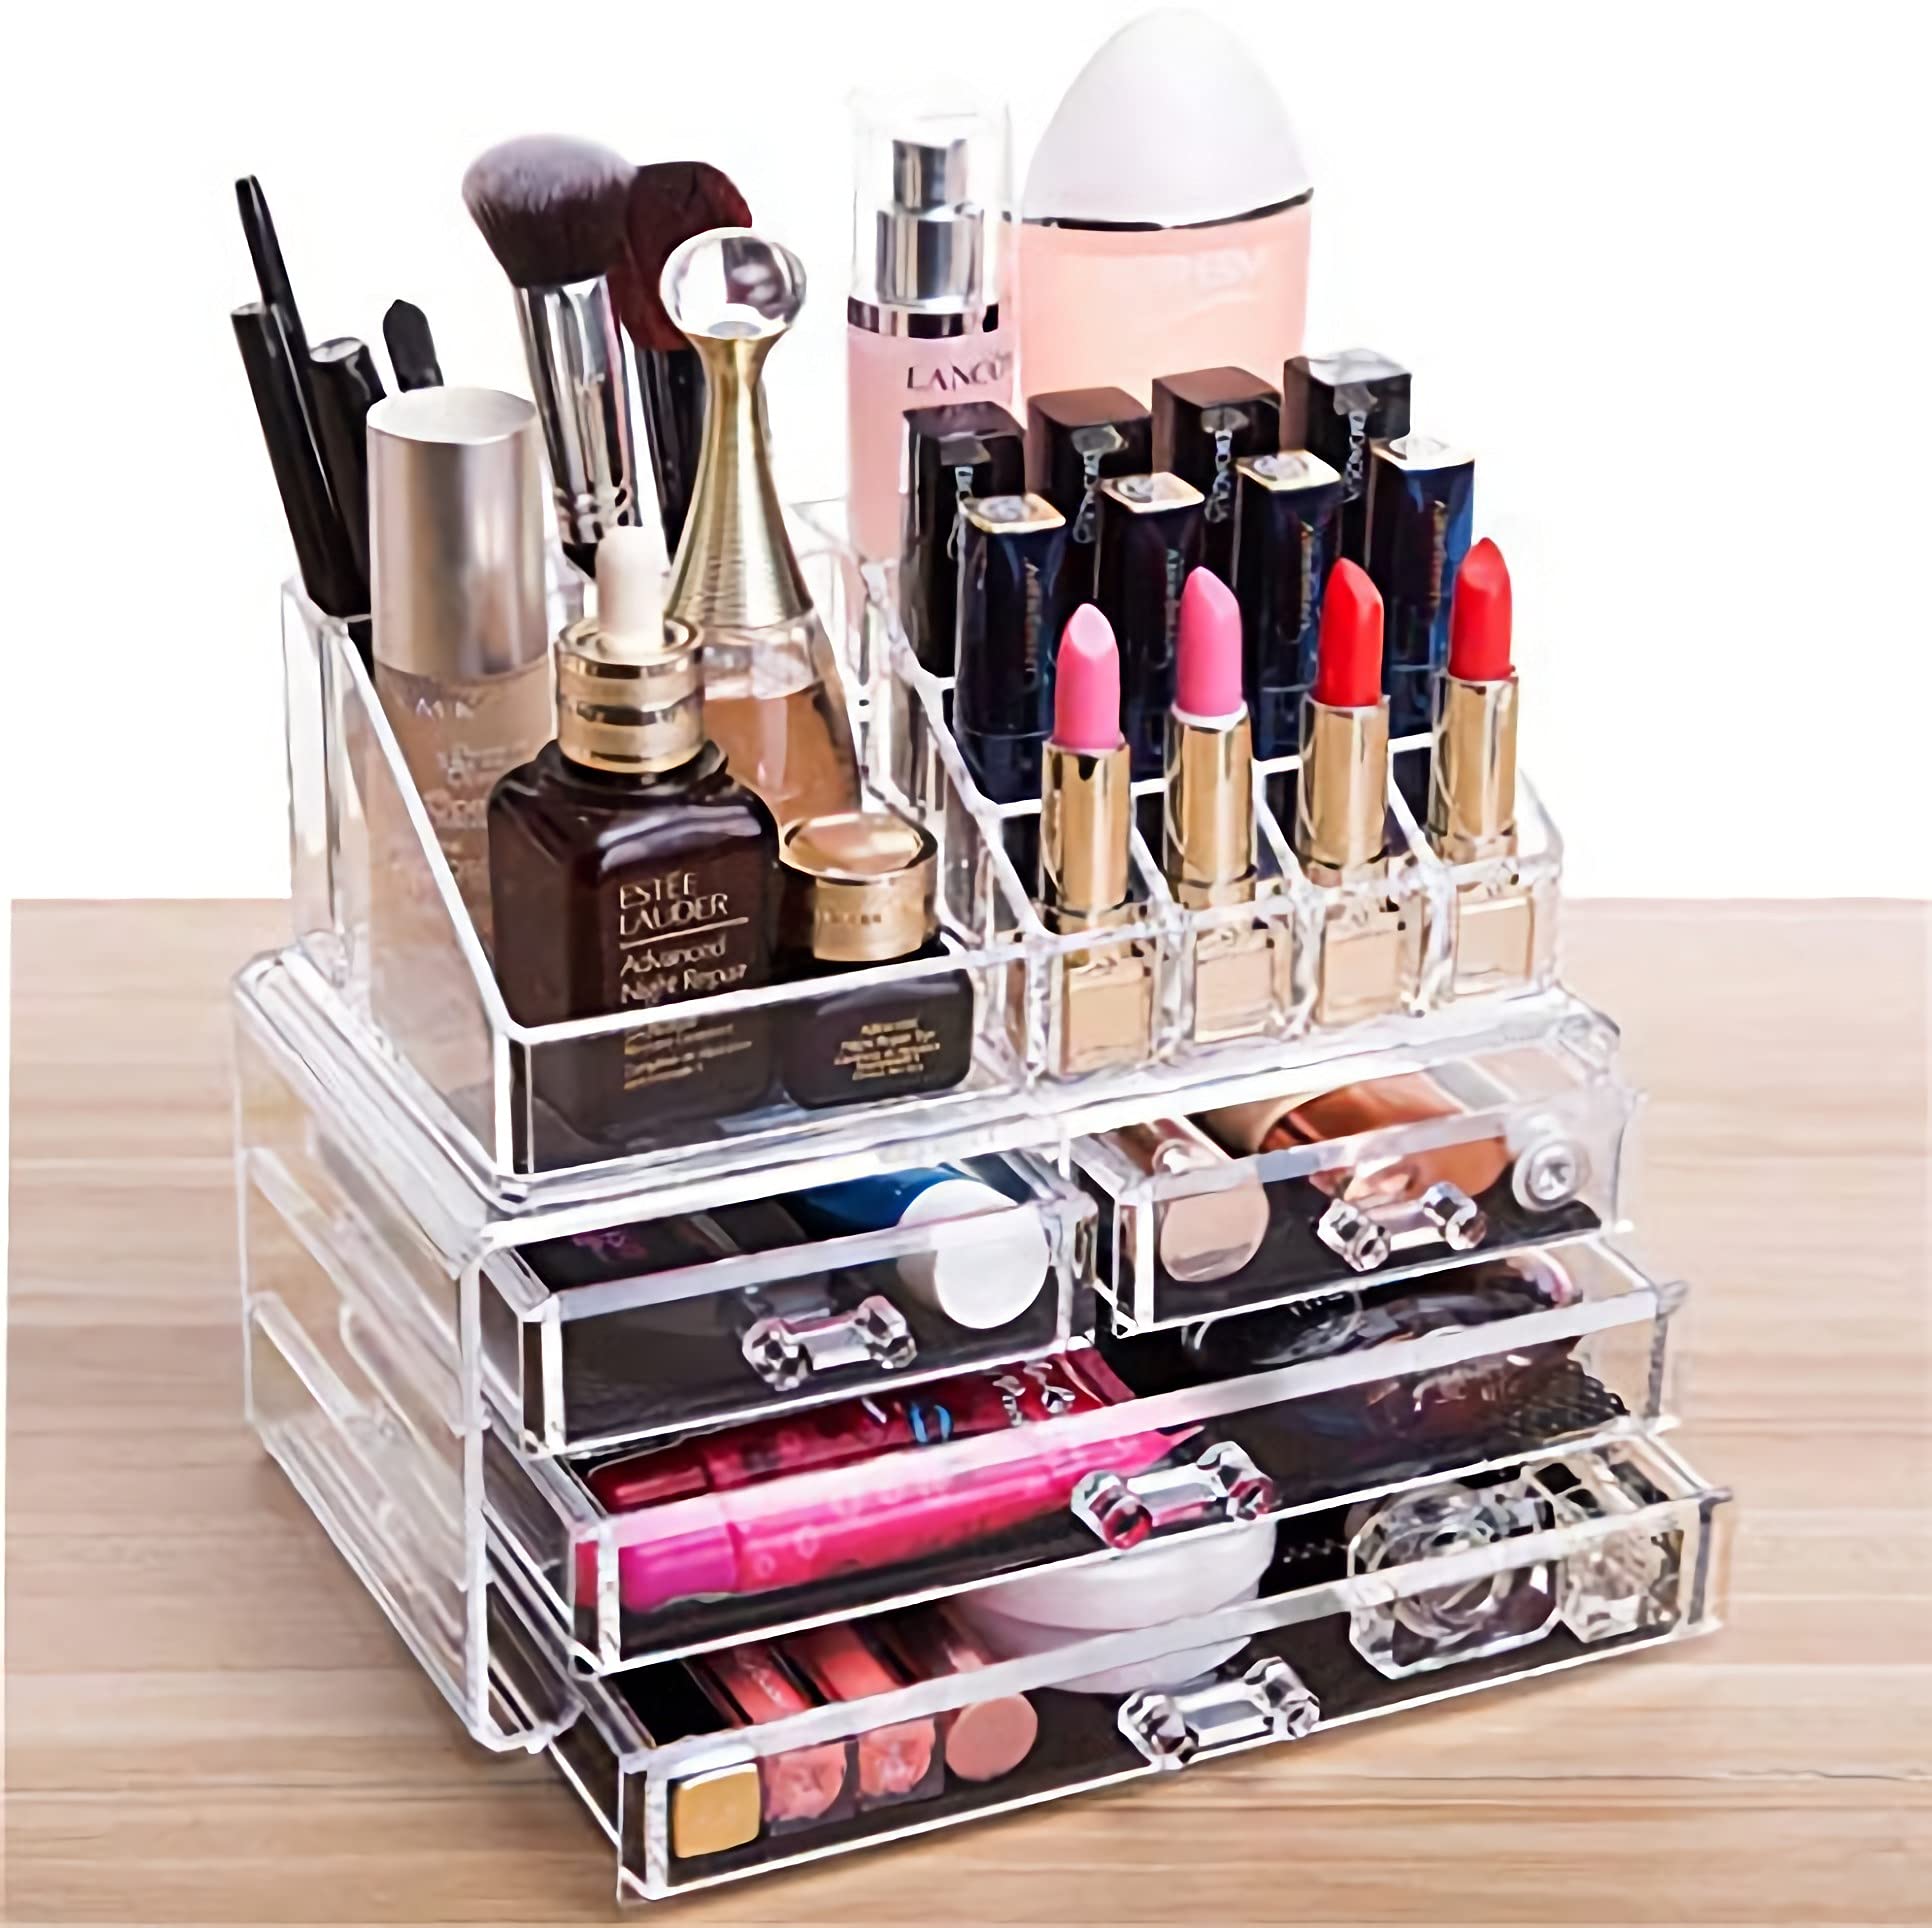 Cq acrylic Clear Makeup Organizer And Storage Stackable Skin Care Cosmetic  Display Case With 4 Drawers